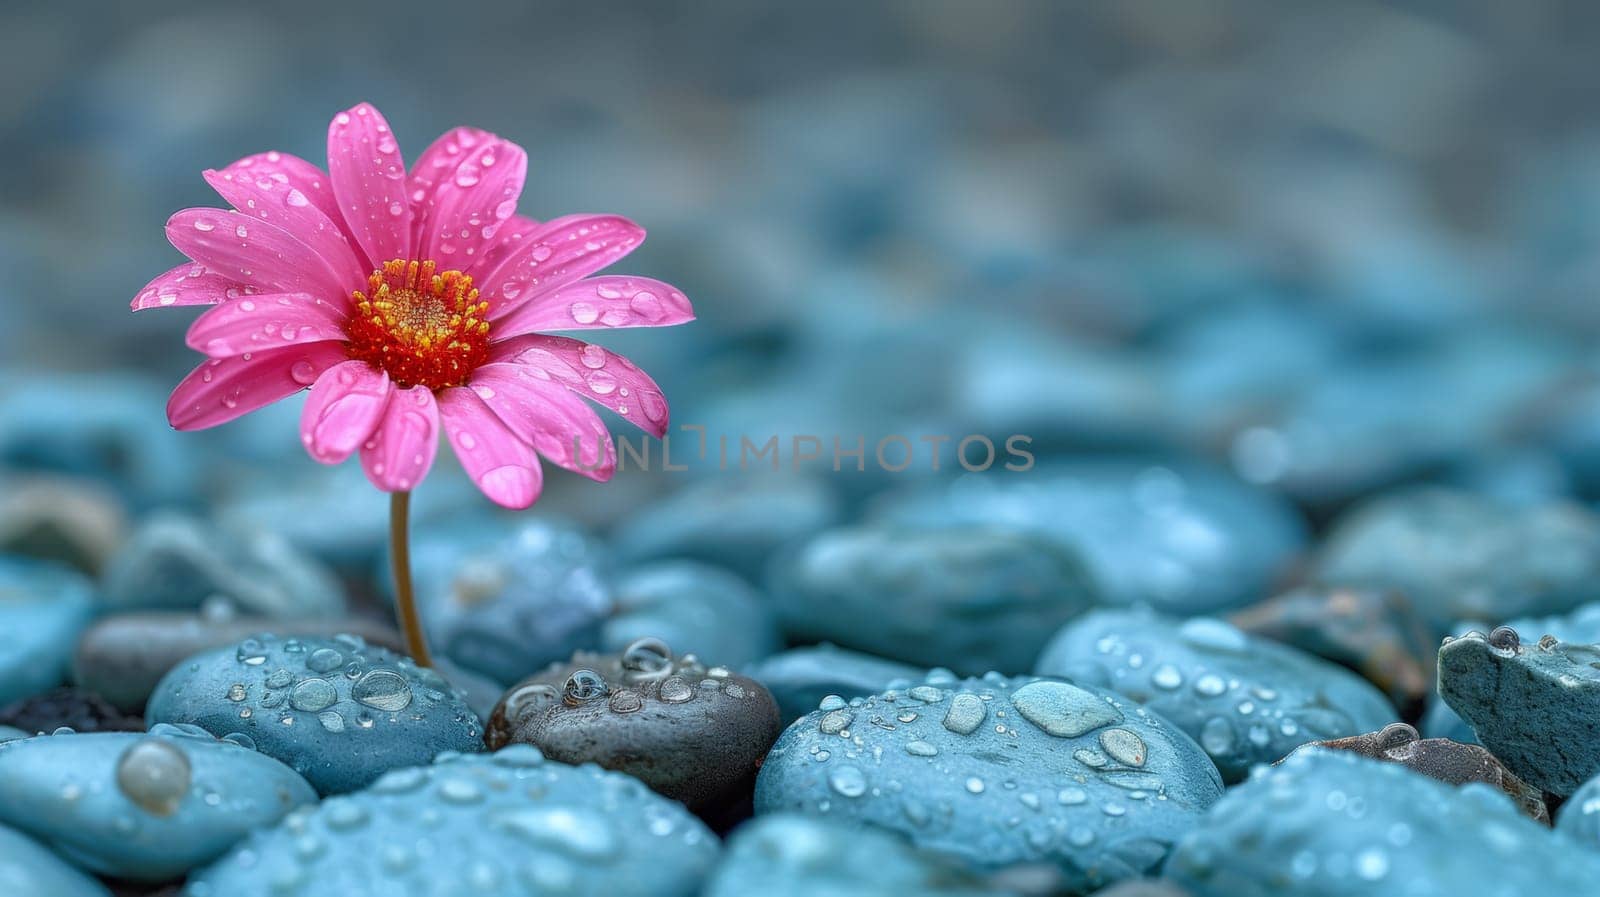 A single pink flower in a sea of blue stones, AI by starush